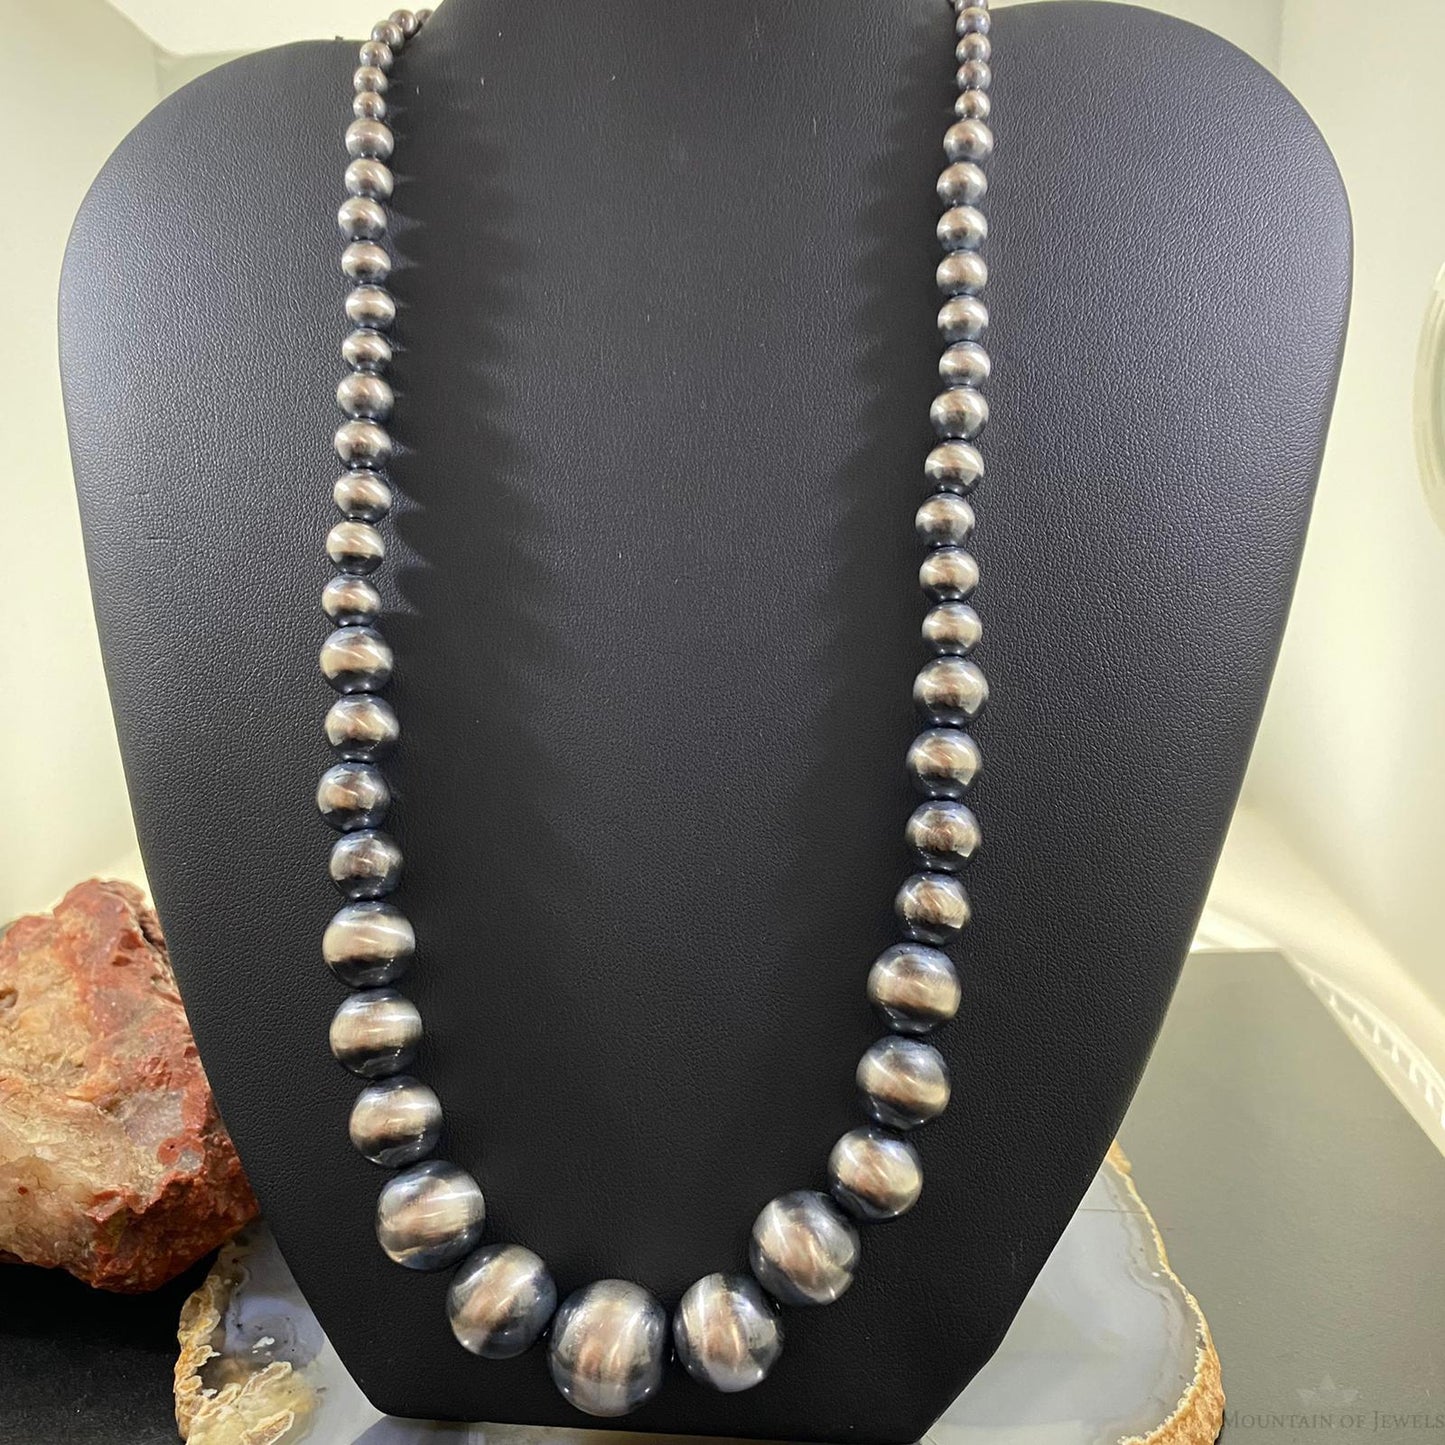 Navajo Pearl Beads Graduated 4-16 mm Sterling Silver 18" Necklace For Women